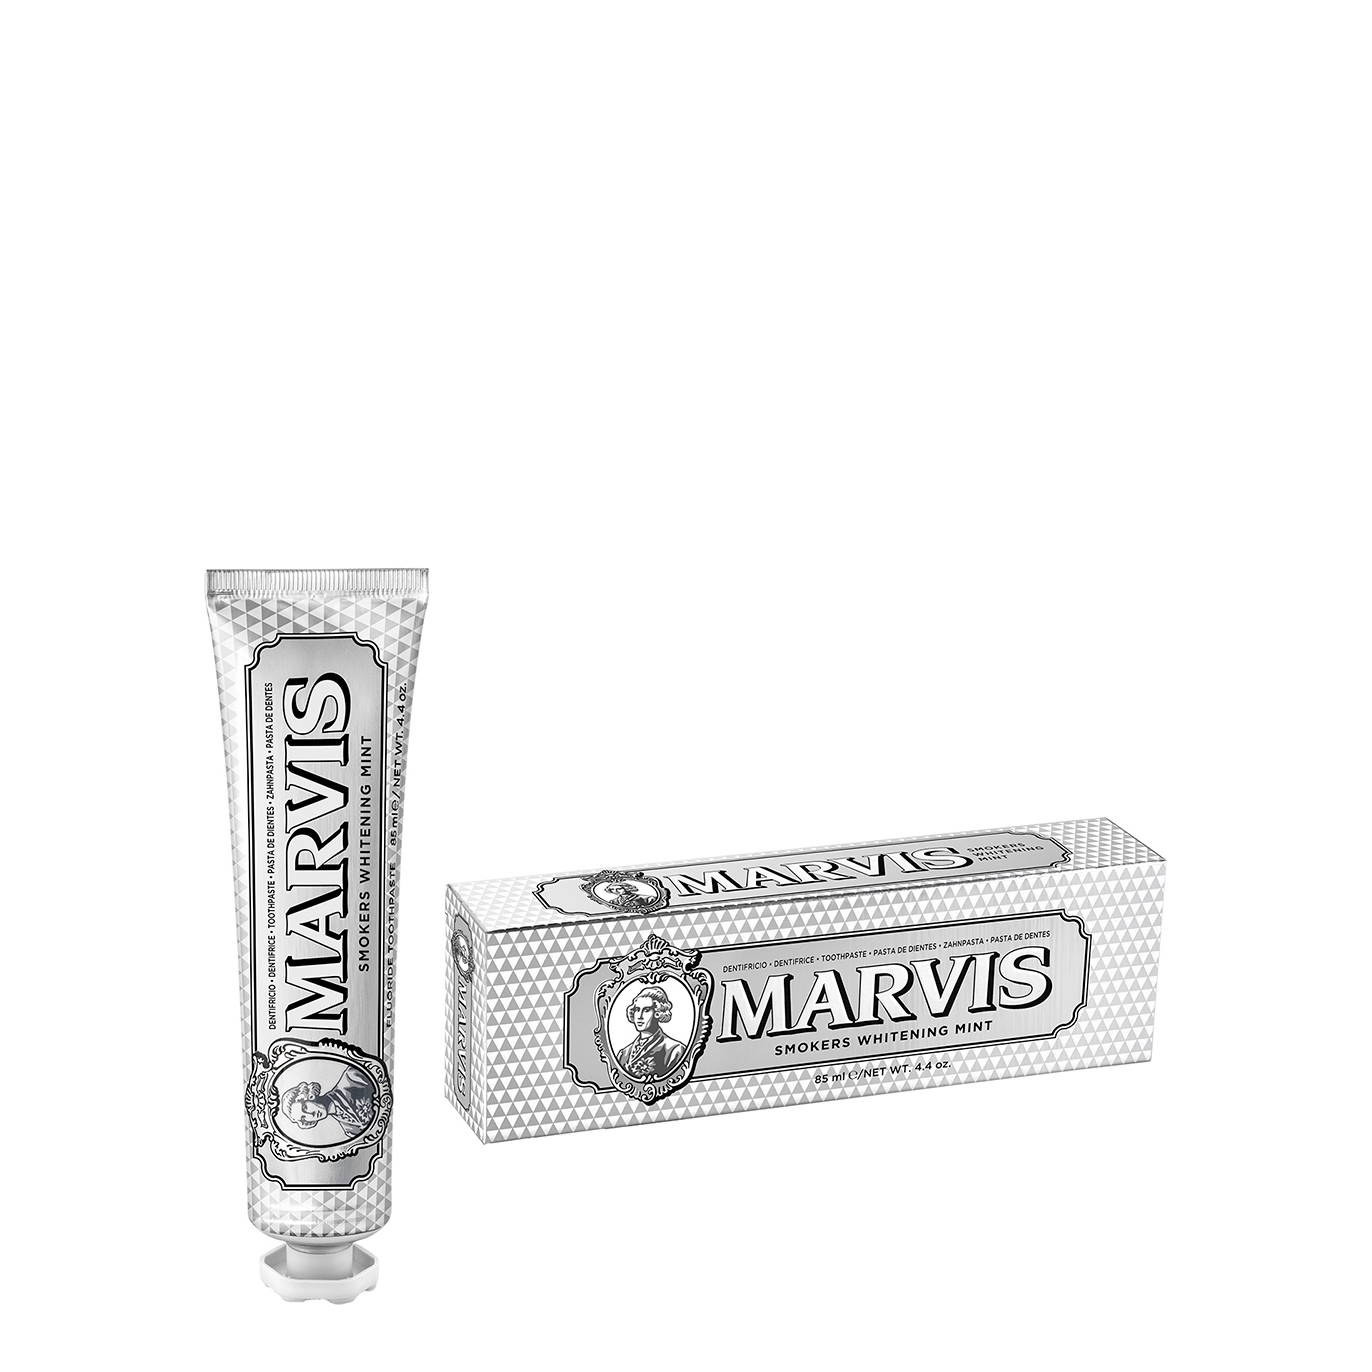 Marvis Whitening Mint Toothpaste For Smokers 85ml In N/a